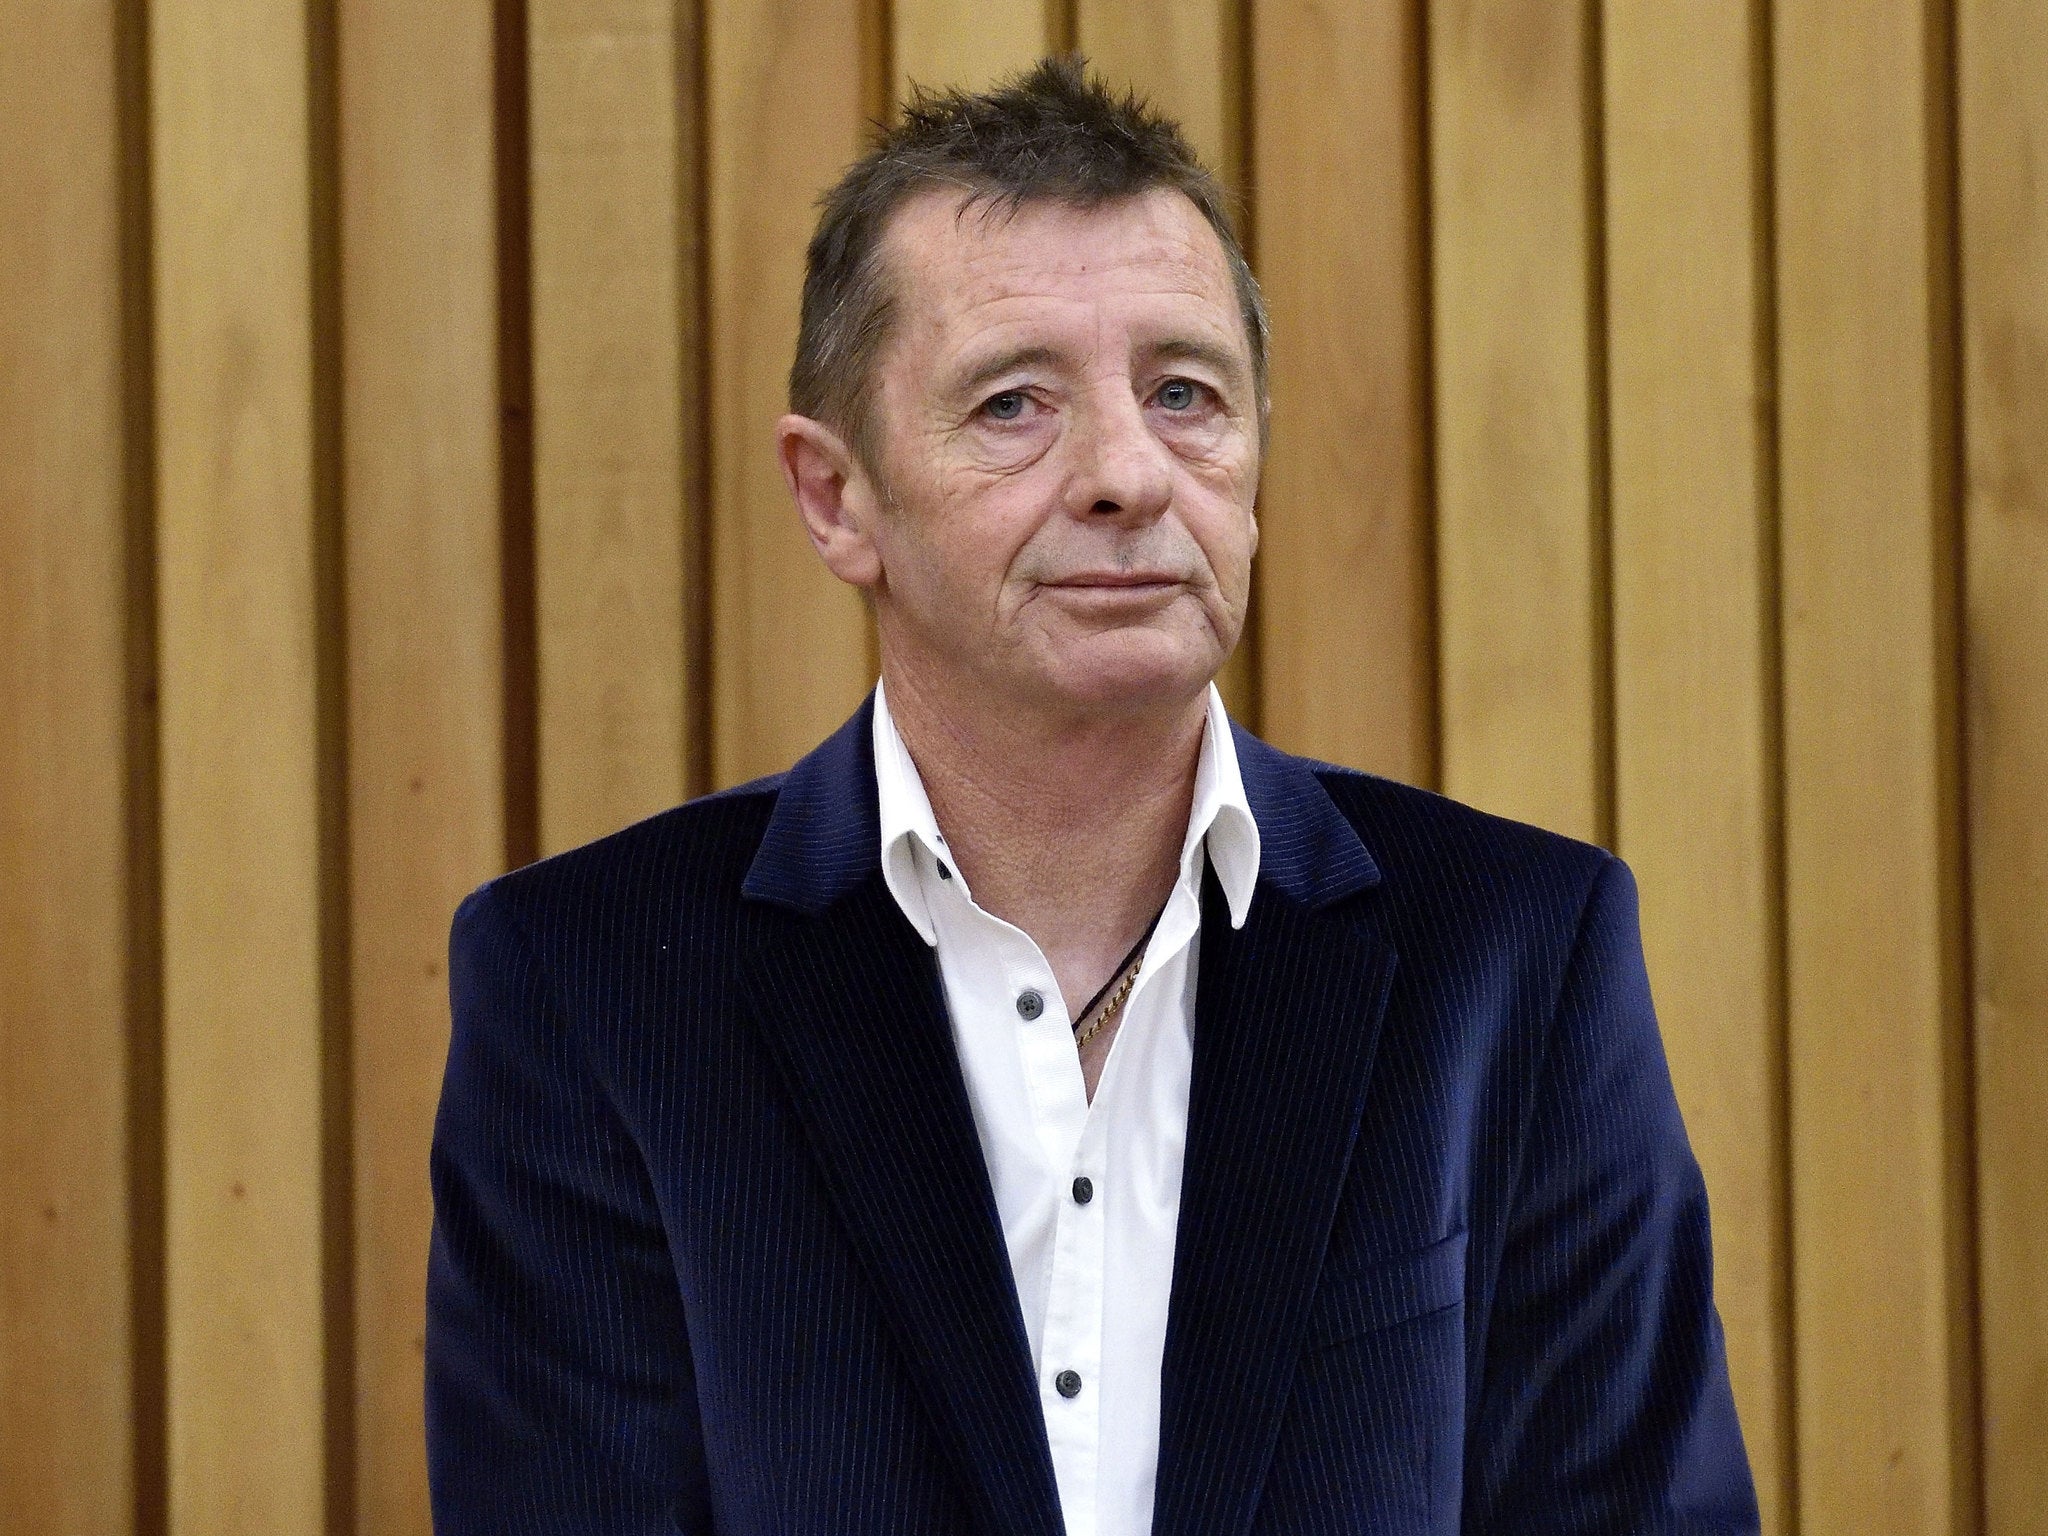 Former AC/DC drummer Phil Rudd sitting in the dock as he awaits sentencing on July 9, 2015